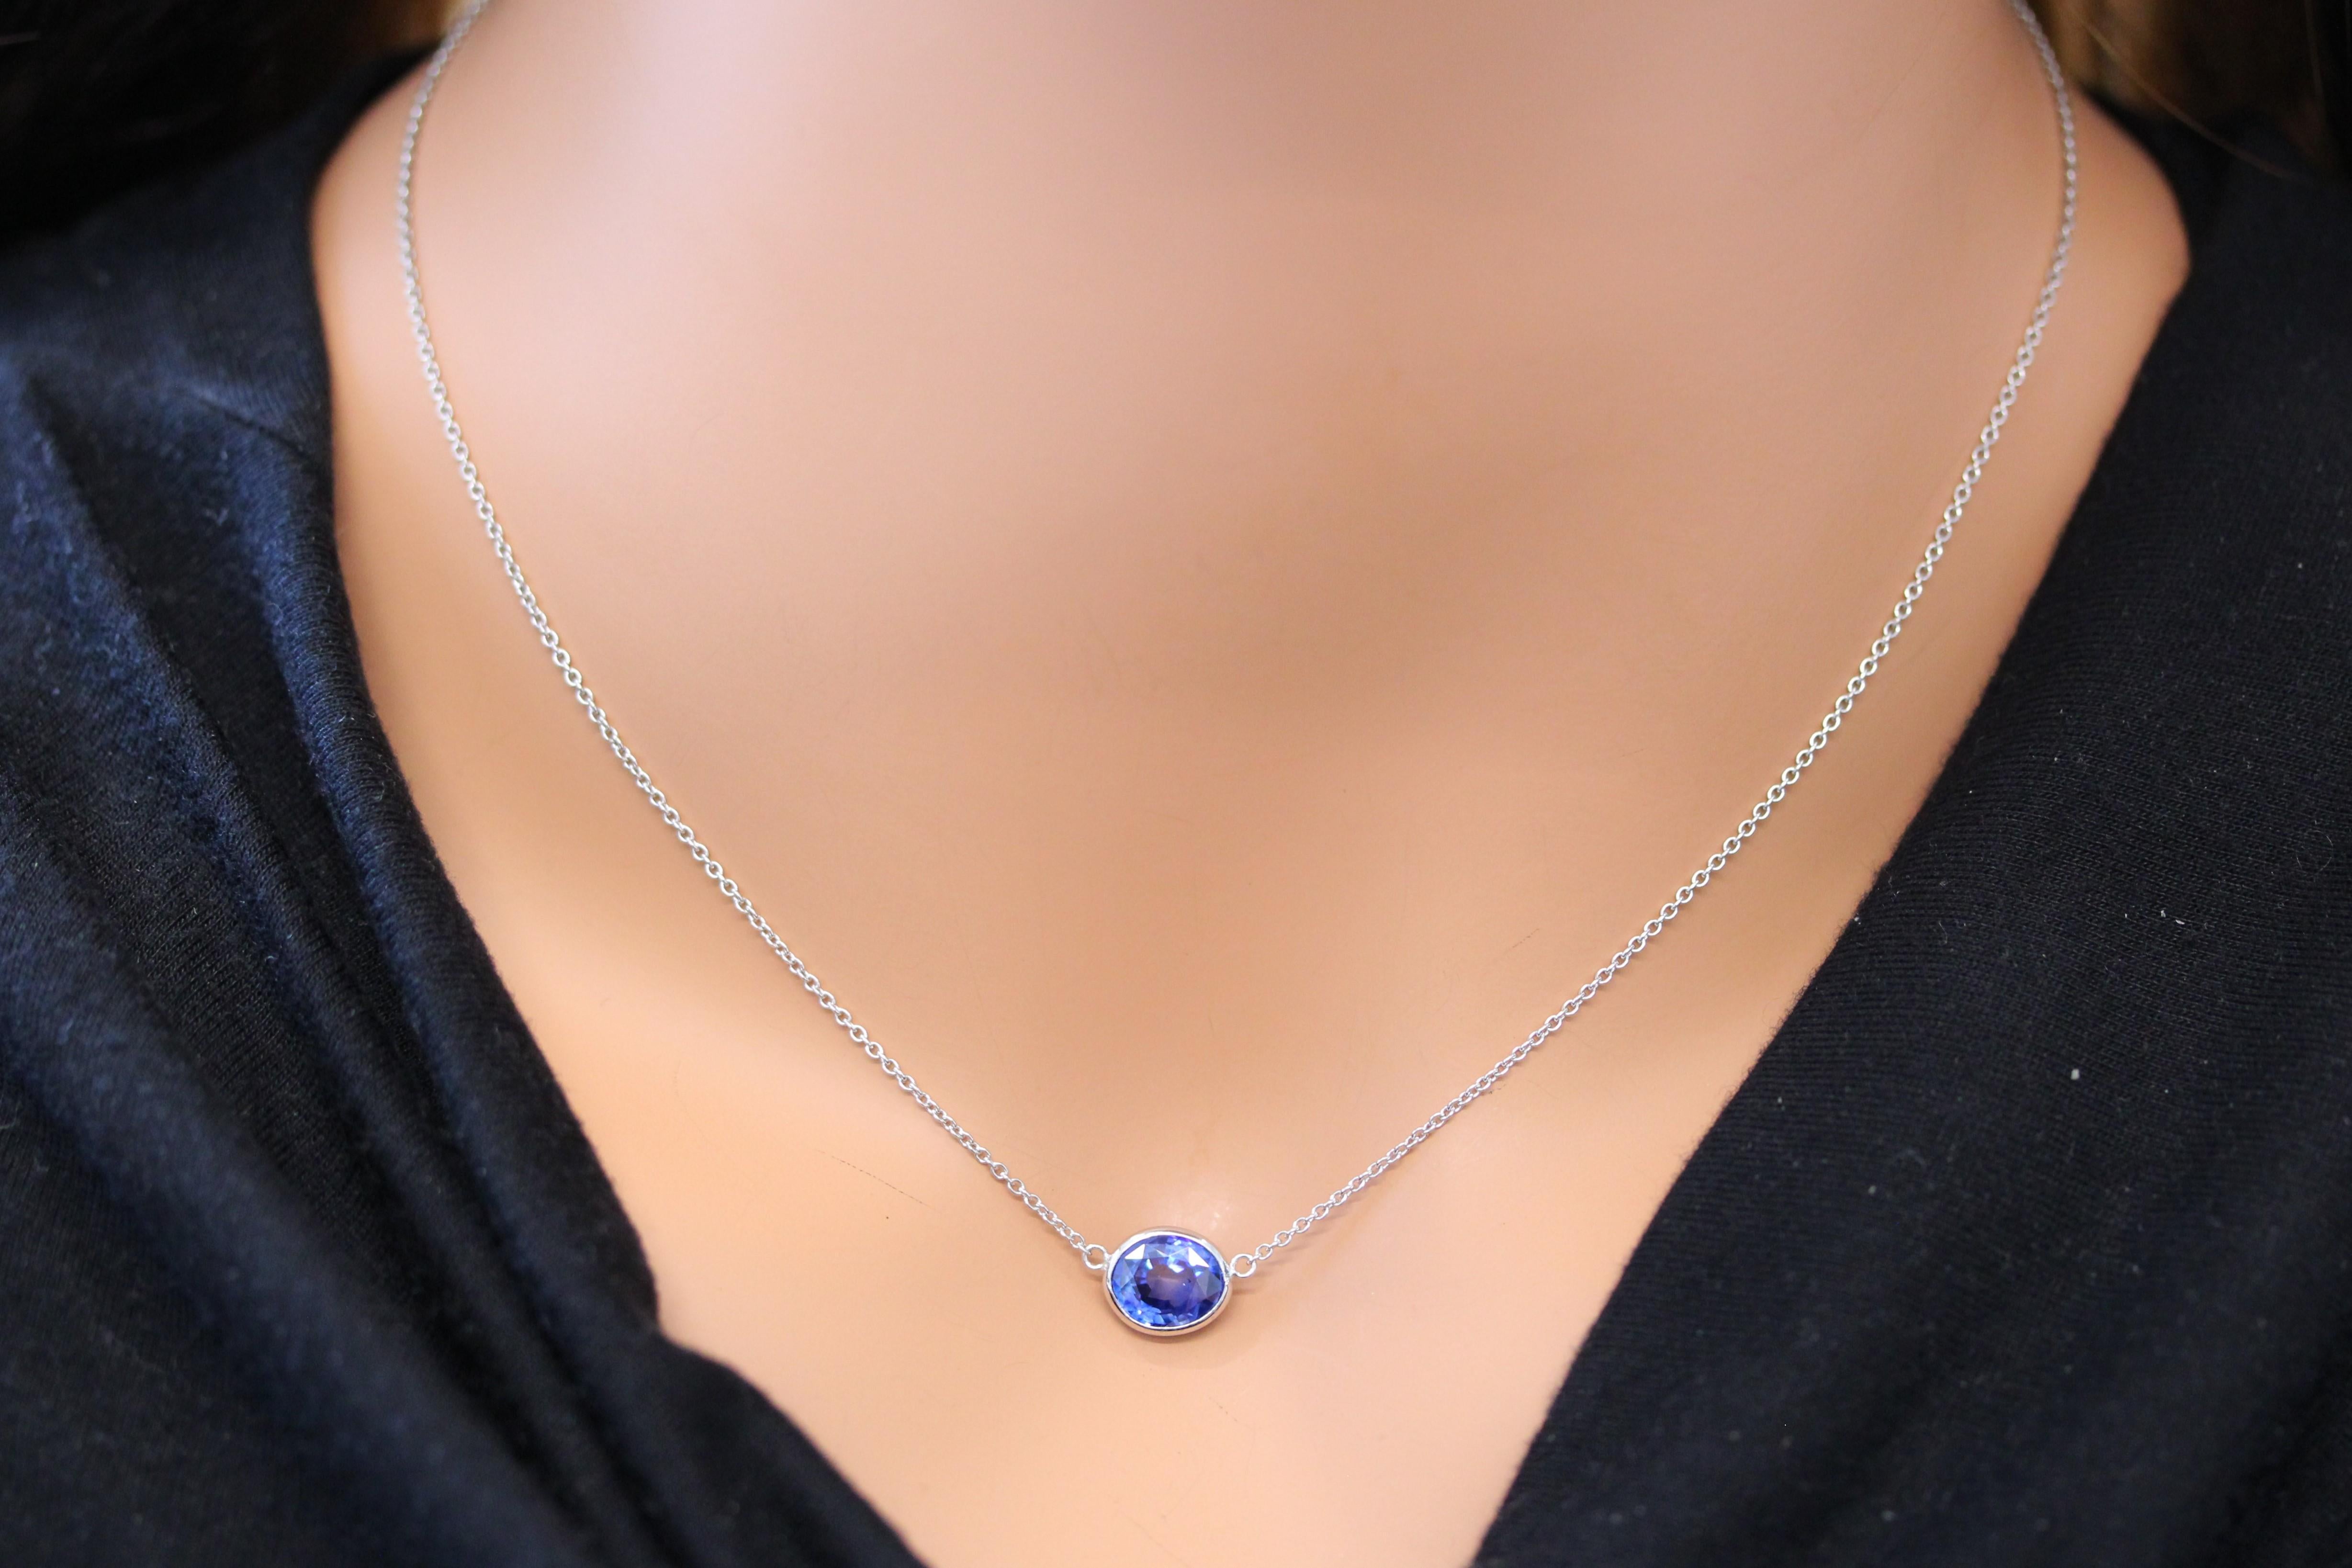 Contemporary 2.76 Carat Oval Sapphire Blue Fashion Necklaces In 14k White Gold For Sale